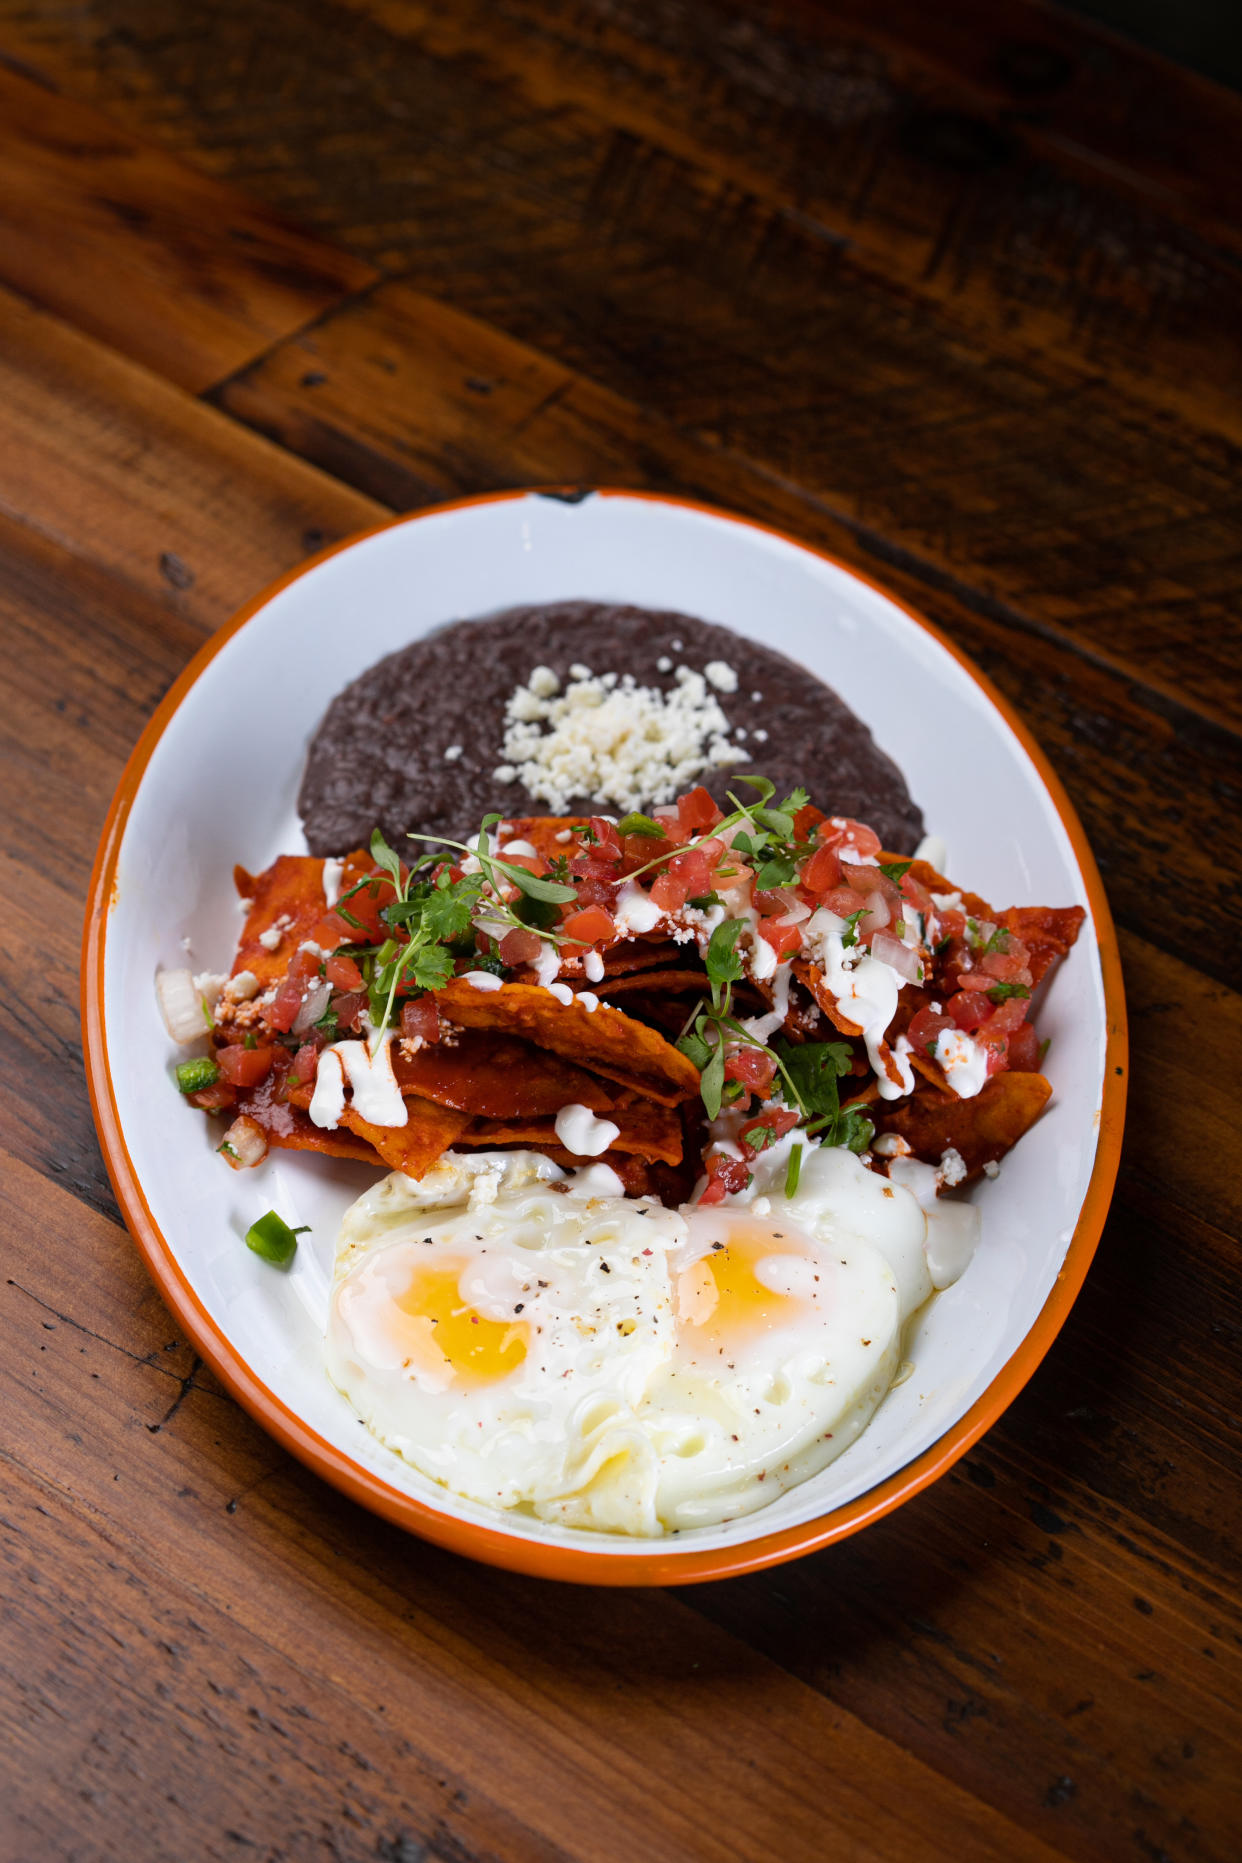 Chilaquiles are a traditional Mexican dish made from fried tortillas. (Photo: Yellow Rosa)